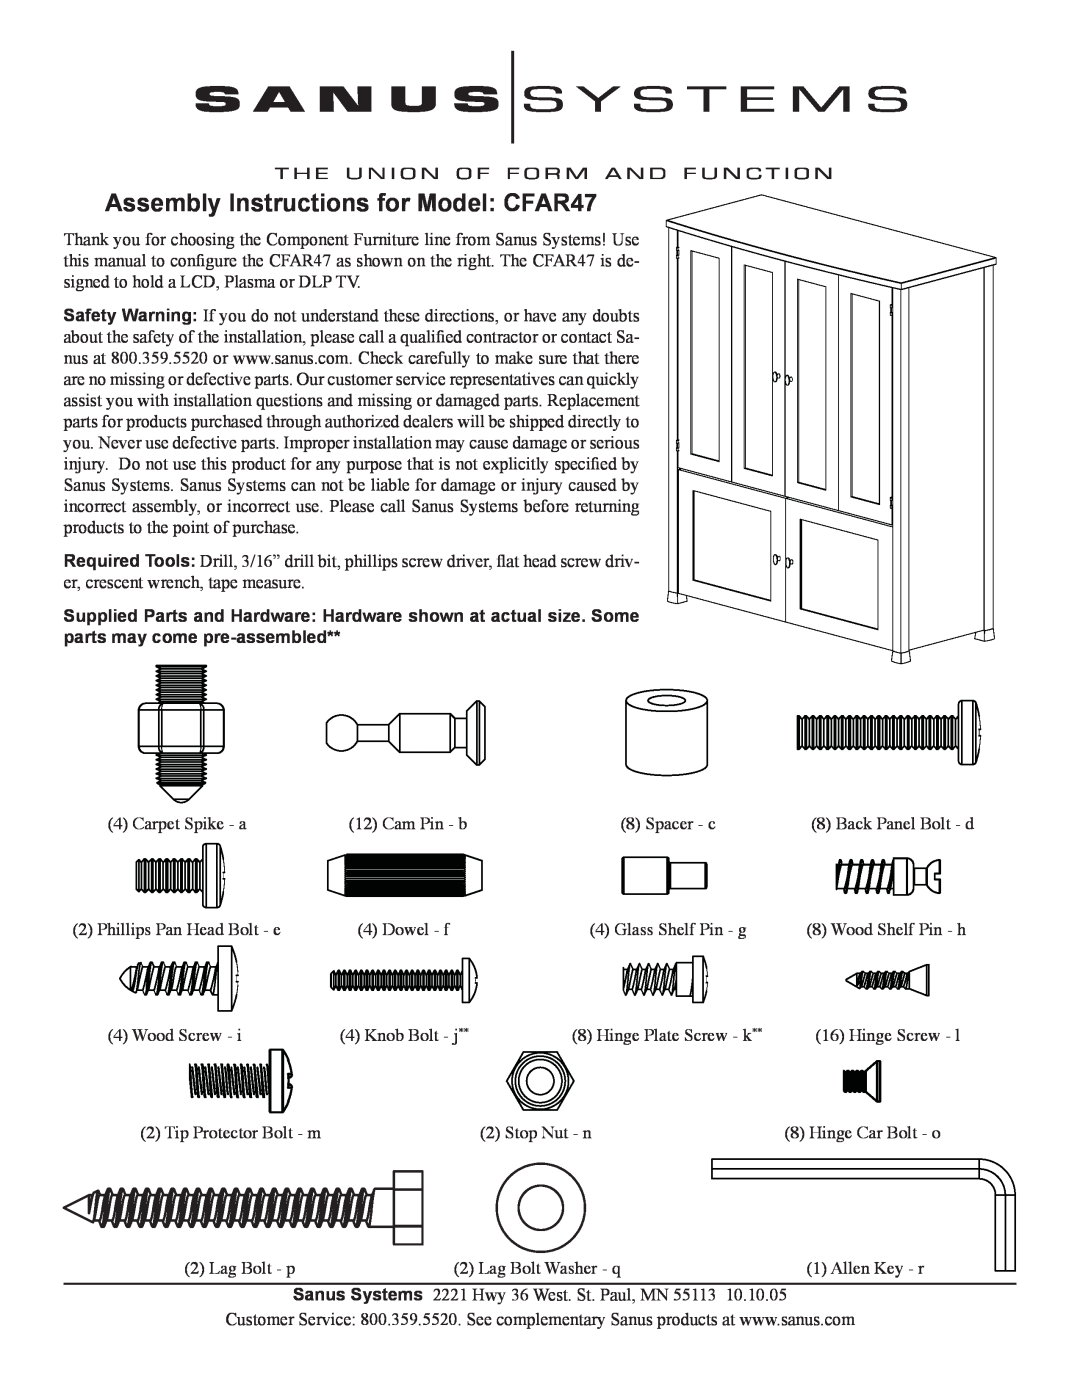 Sanus Systems manual Assembly Instructions for Model CFAR47 